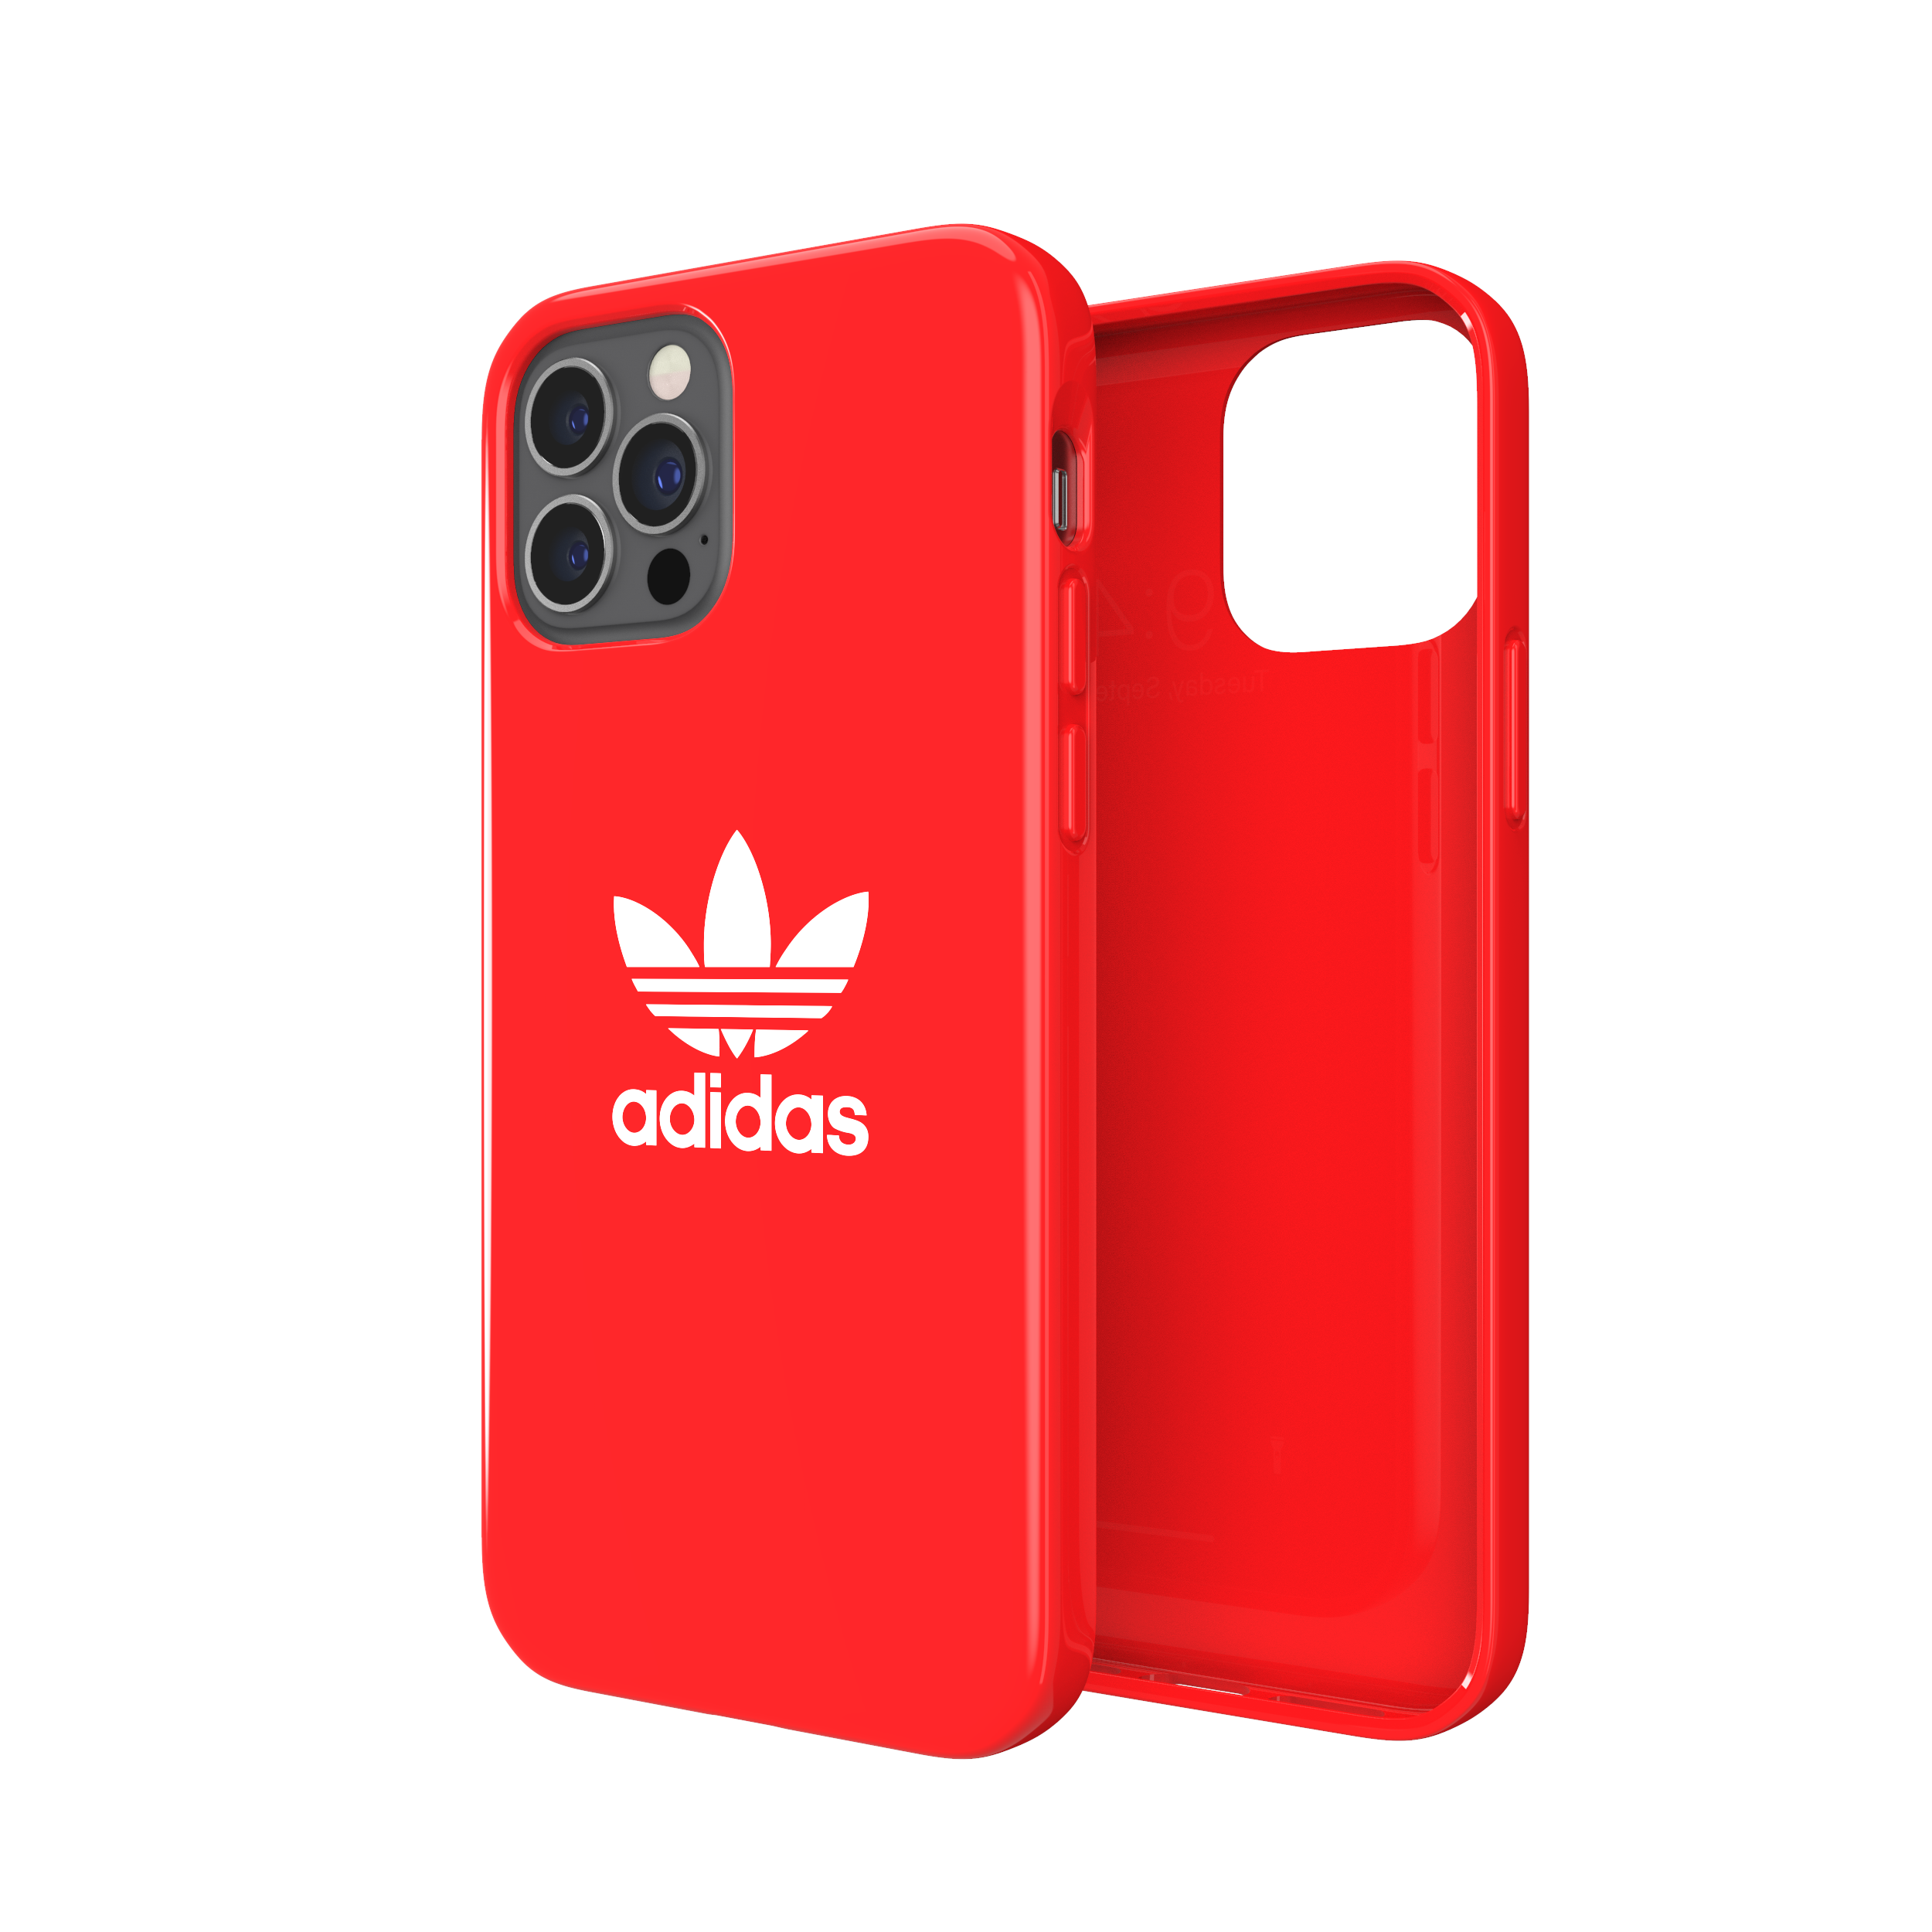 adidas SNAP Apple iPhone 12 / 12 Pro Trefoil Case - Back cover w/ Trefoil Design, Scratch & Drop Protection w/ TPU Bumper, Wireless Charging Compatible - Scarlet